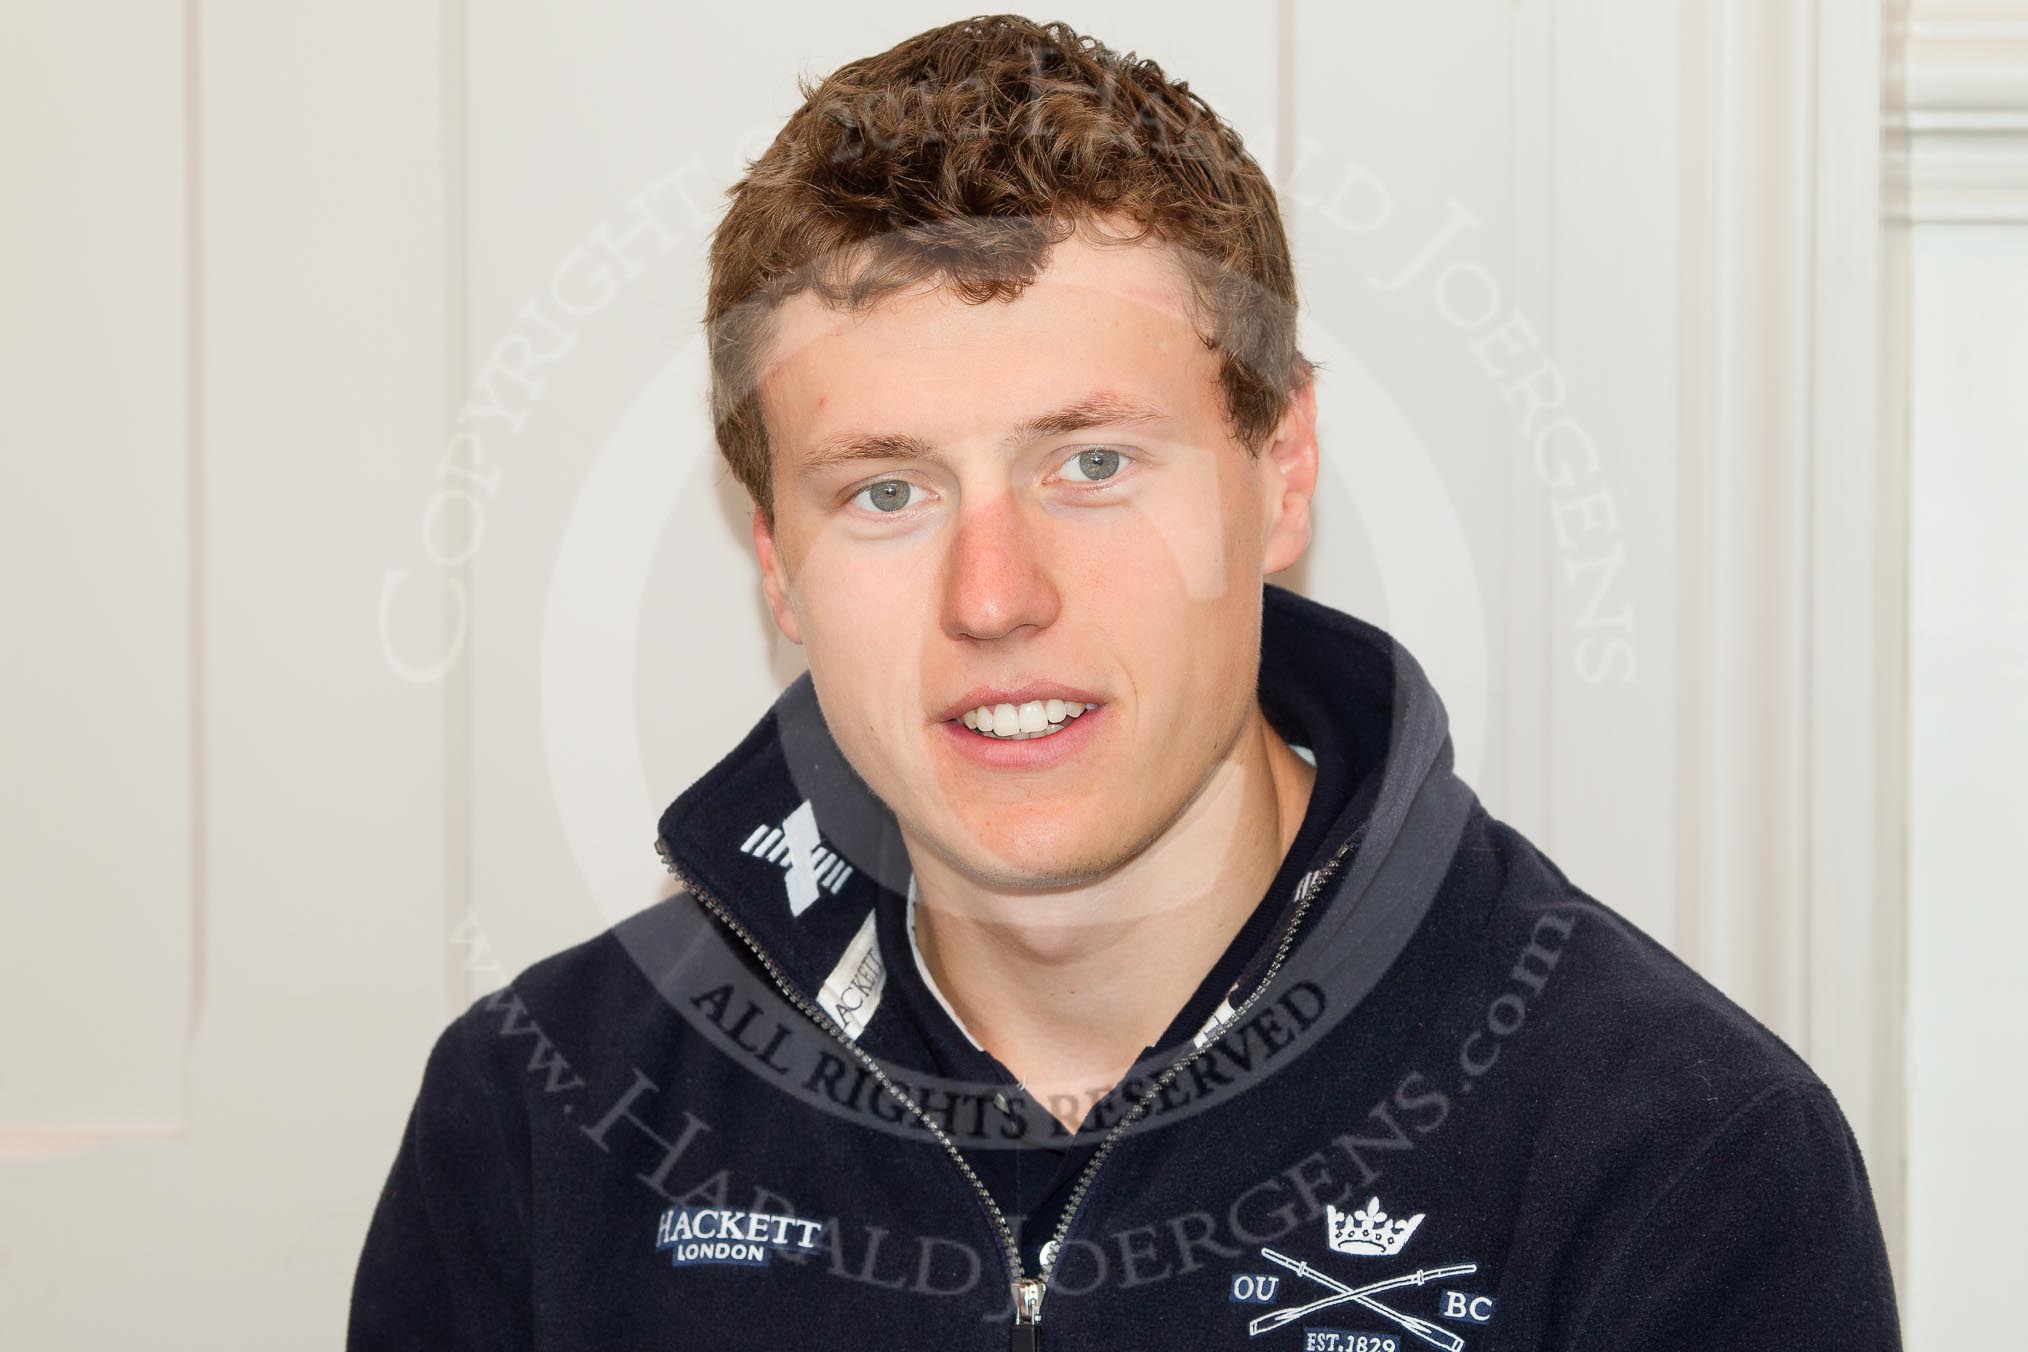 Oxford University Boat Club president Karl Hudspith during the press conference on April 5, 2012, at the BT Press Centre, two days before the 2012 Boat Race.